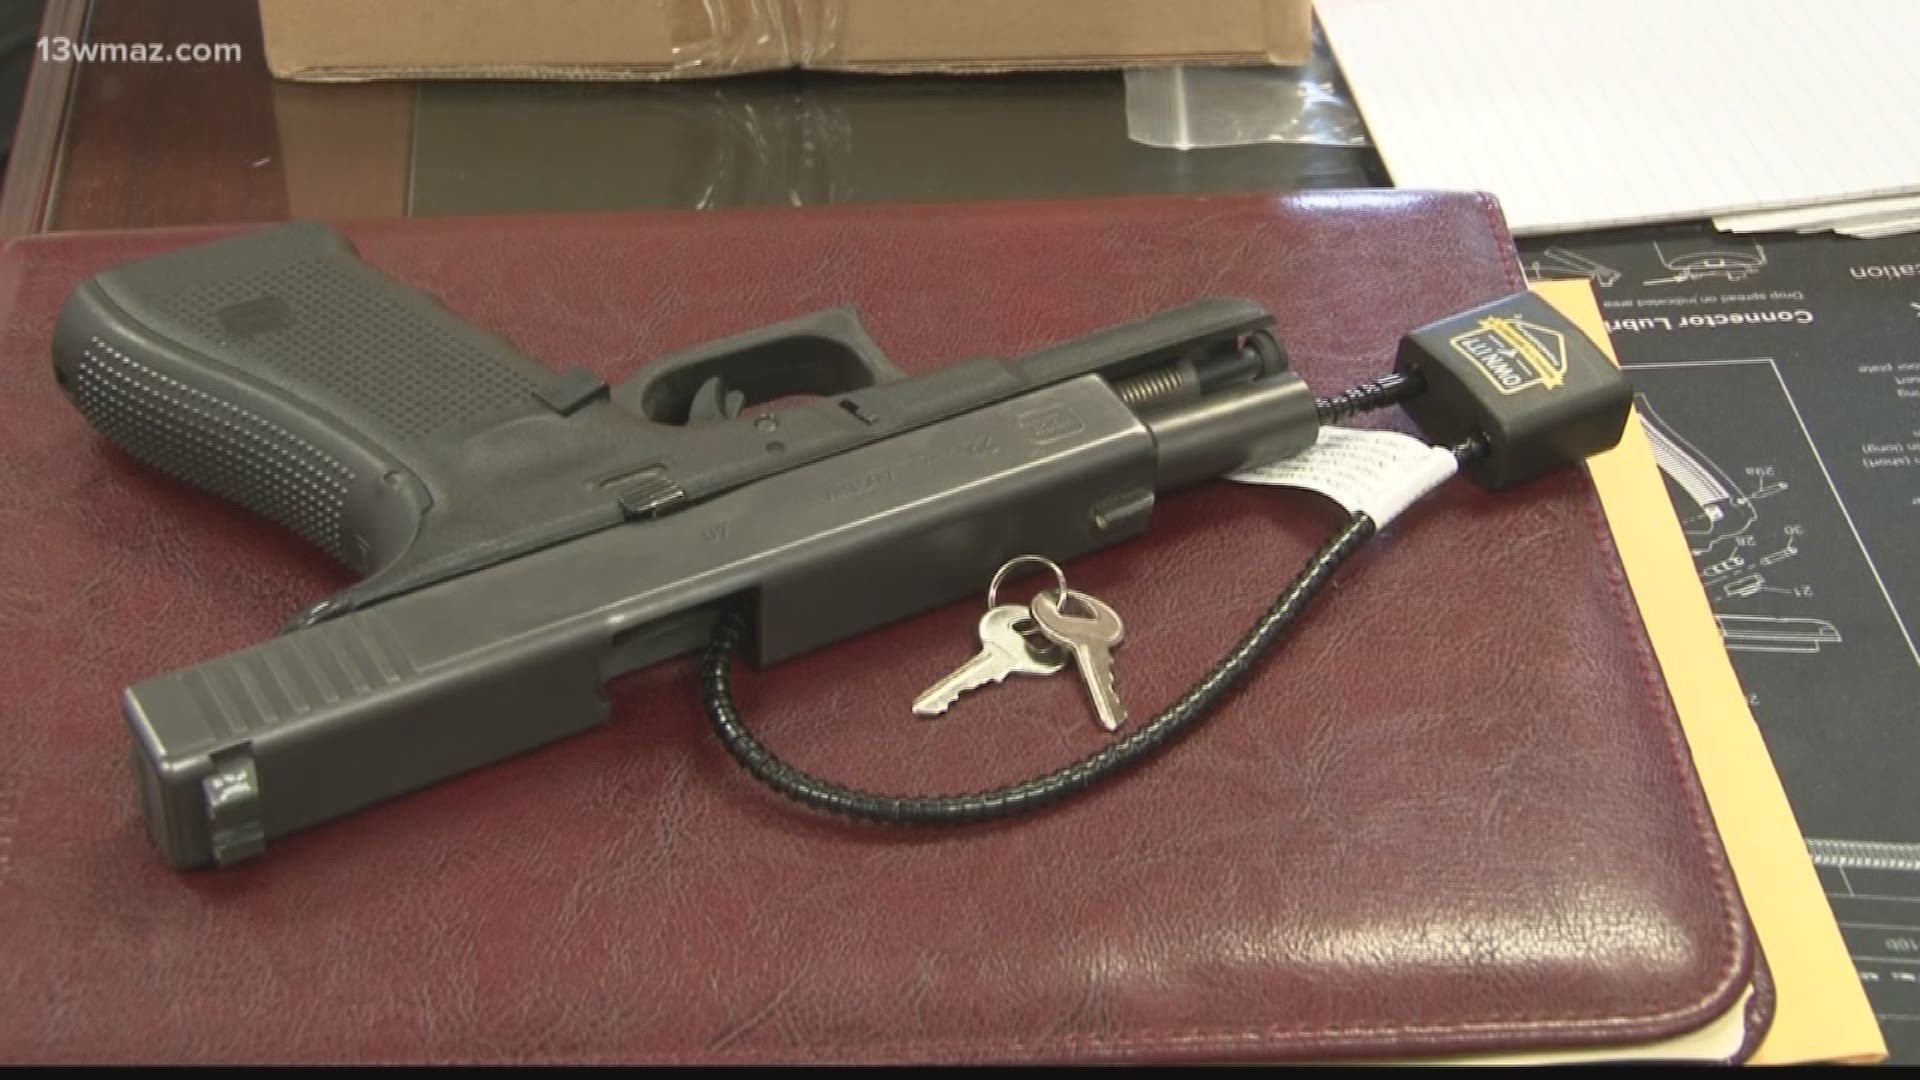 The Jones County Sheriff's Office says a 2-year-old and his 5-year-old brother were playing with a loaded gun they found on the living room table. The gun discharged and shot the toddler in the head. The sheriff's office is taking steps to prevents tragedies like that one from happening again.